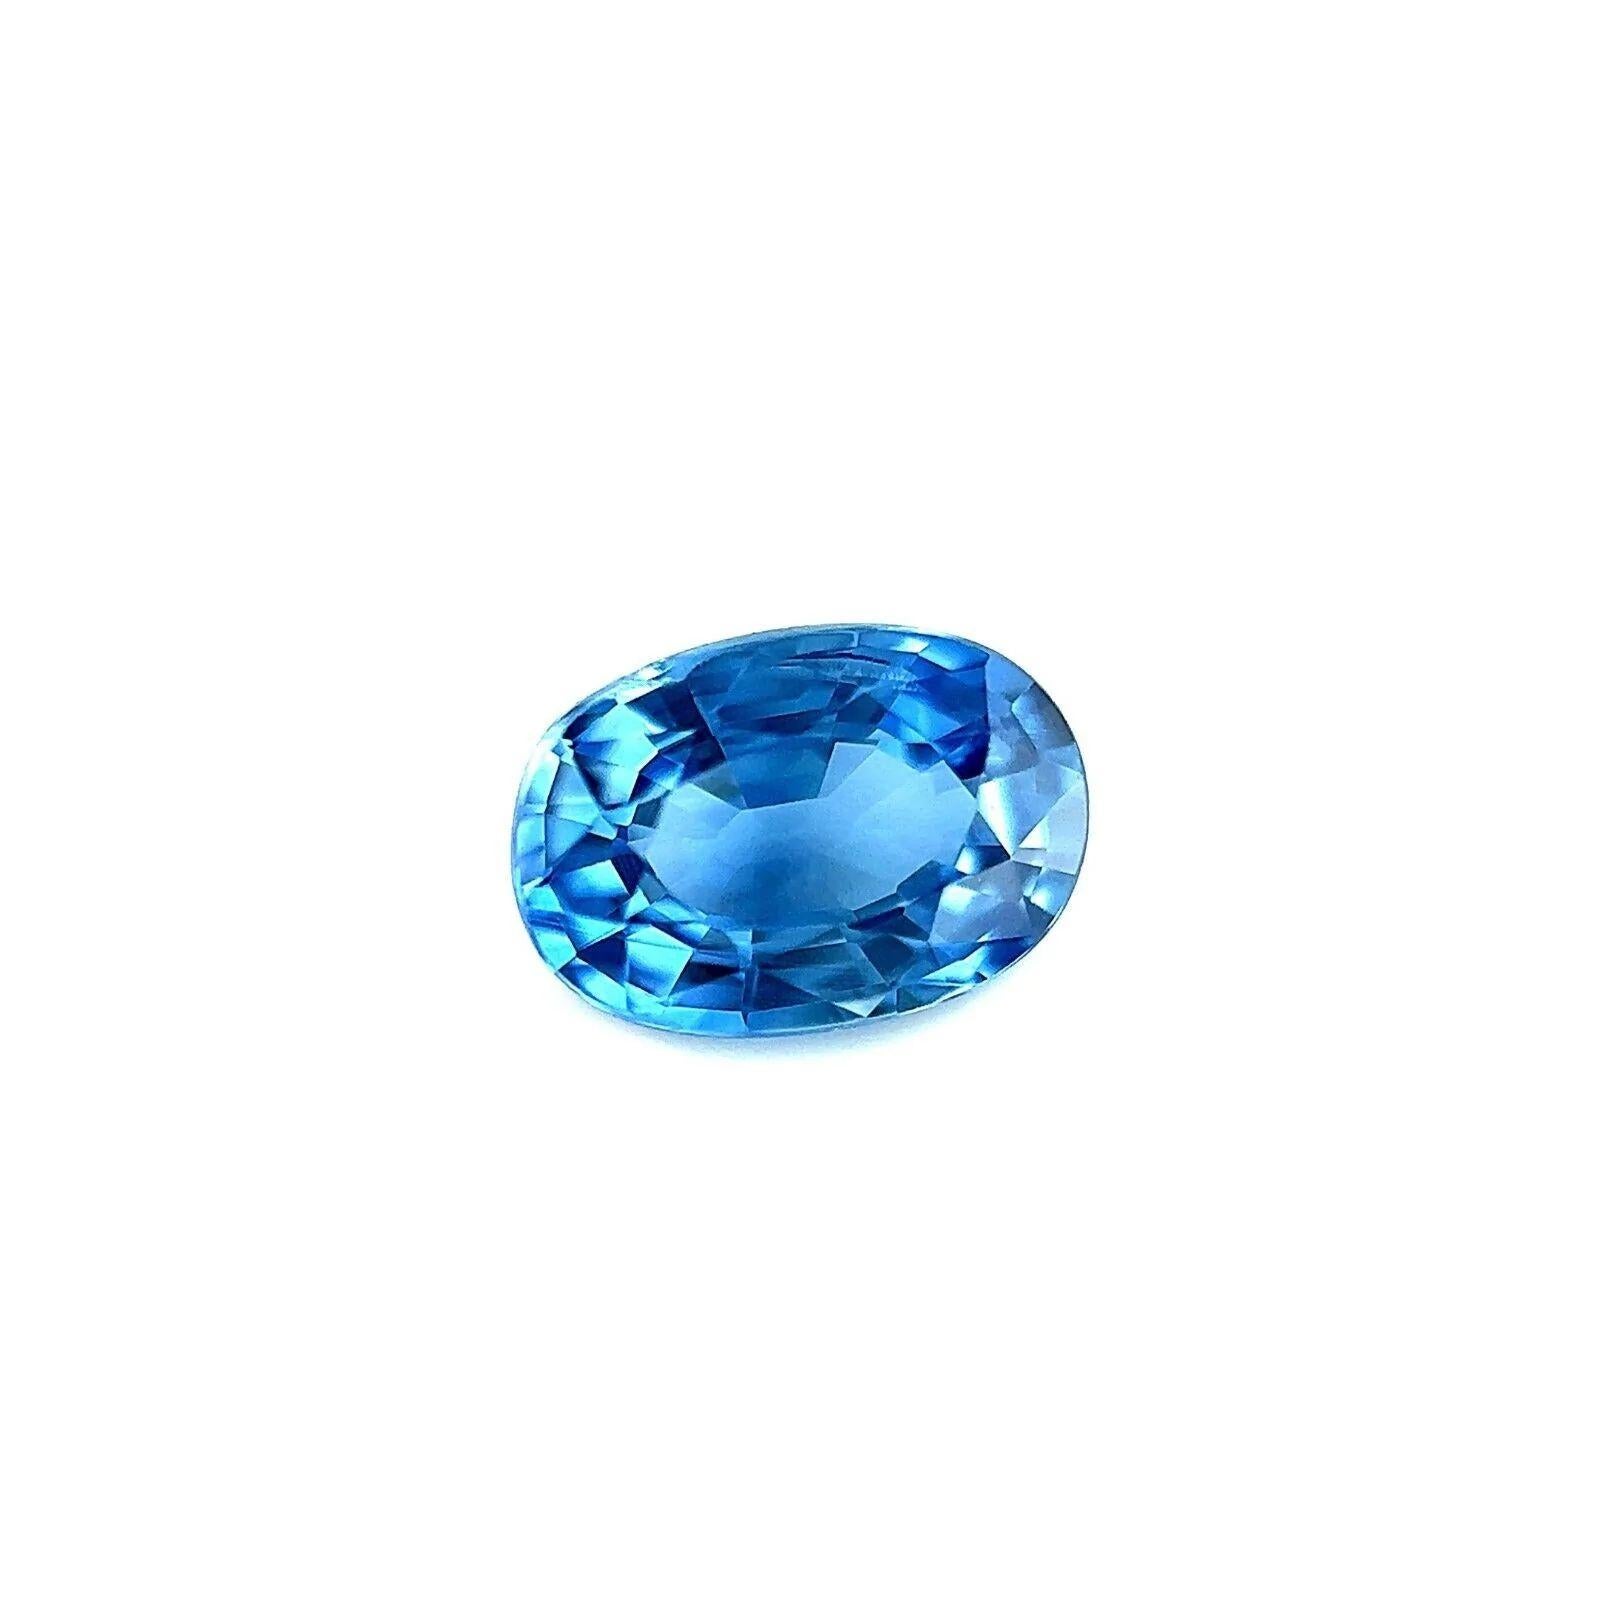 1.28ct Fine Ceylon Blue Sapphire Oval Cut Loose Gem 7.6x5.2mm VVS Sri Lankan

Fine Natural Ceylon Blue Sapphire Gemstone.
1.28 Carat with a vivid blue colour and very good clarity. Only some small natural inclusions visible when looking closely,